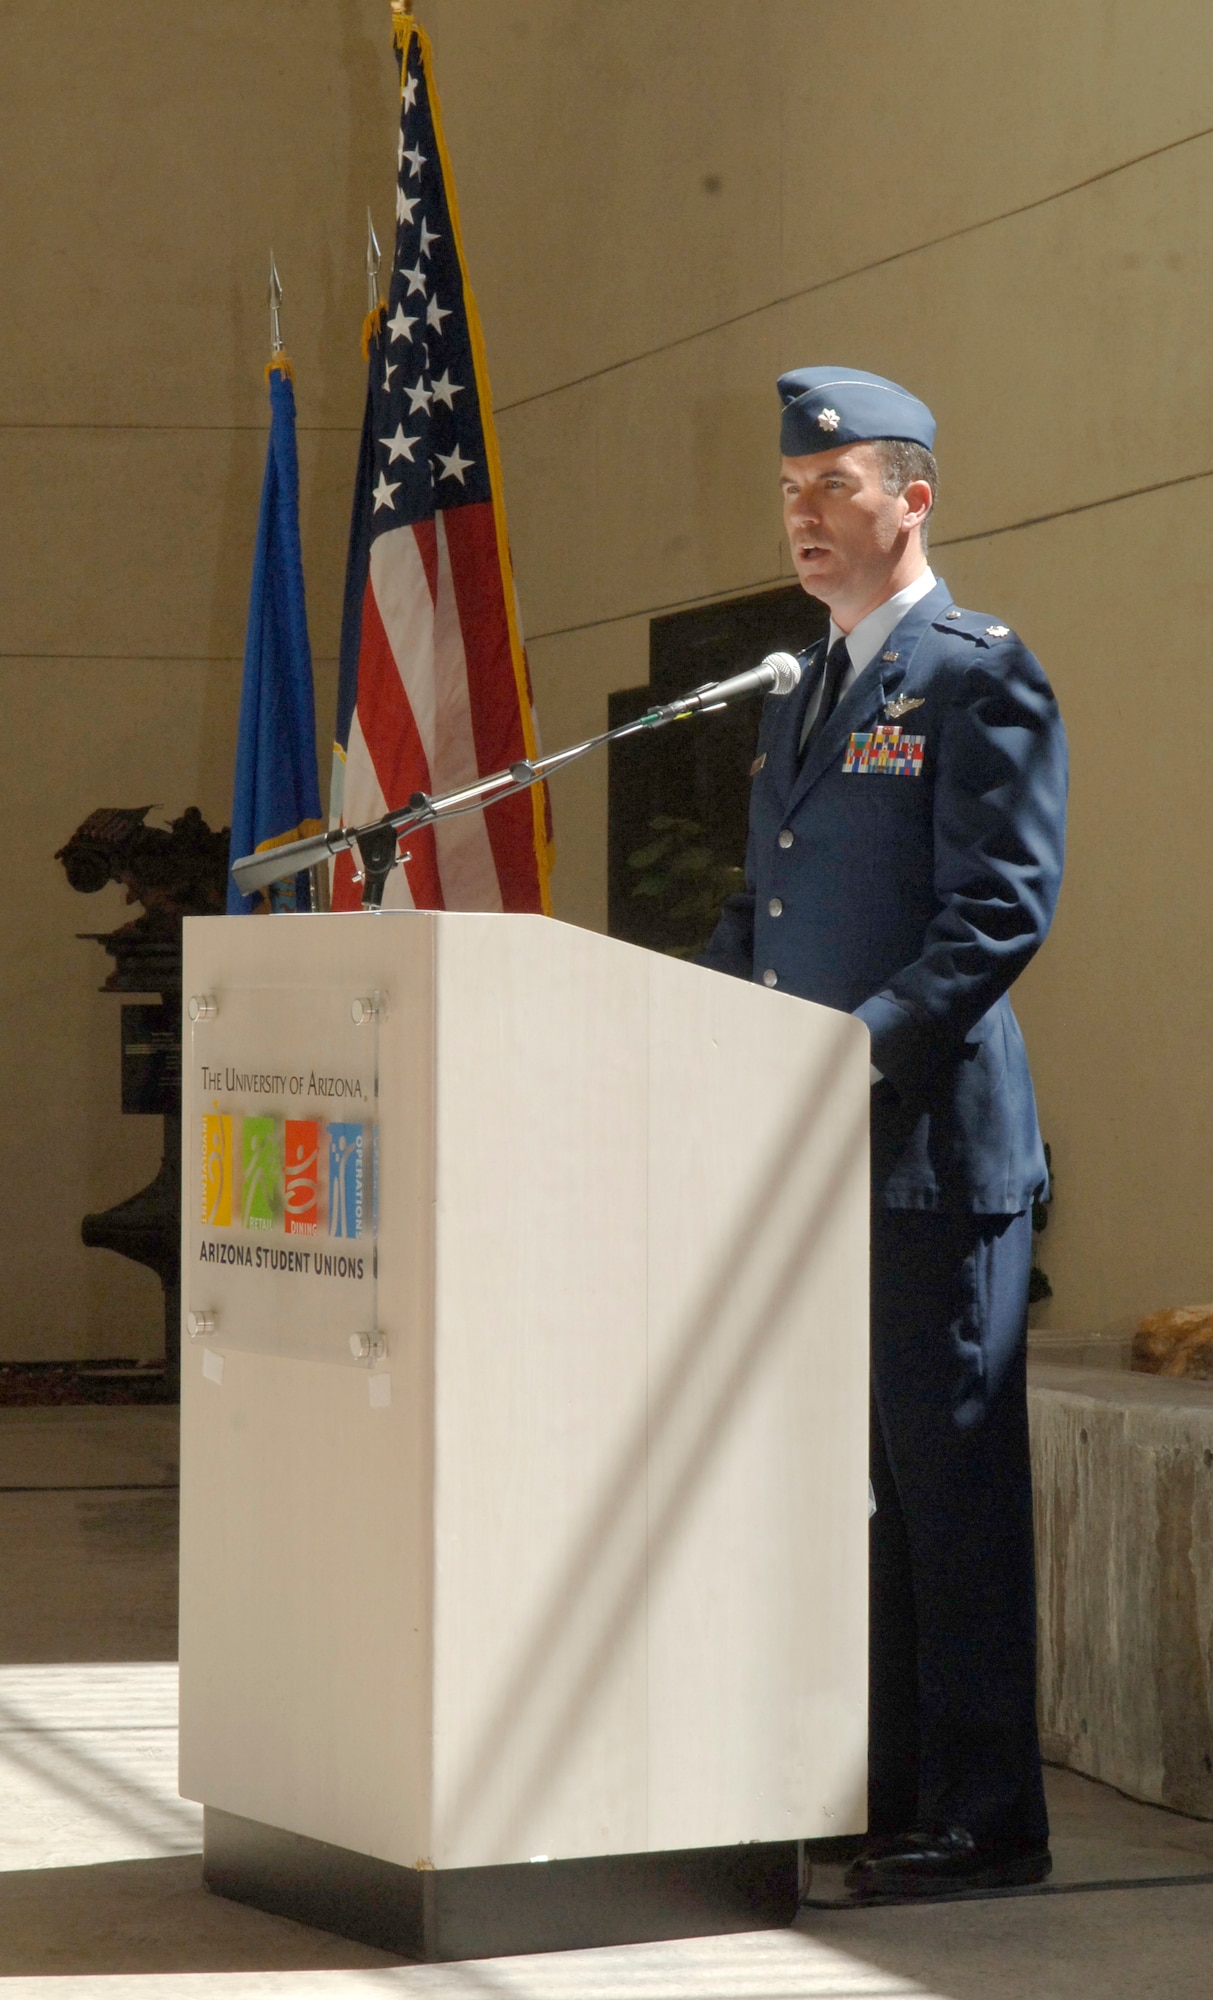 Lt. Col. Chris Buckley, 612th Air Operations Center, Strategy Division chief, delivers a speech during a memorial ceremony honoring the Doolittle raid and victory at the Battle of Midway June 3. (U.S. Air Force photo/Tech. Sgt. Eric Petosky)